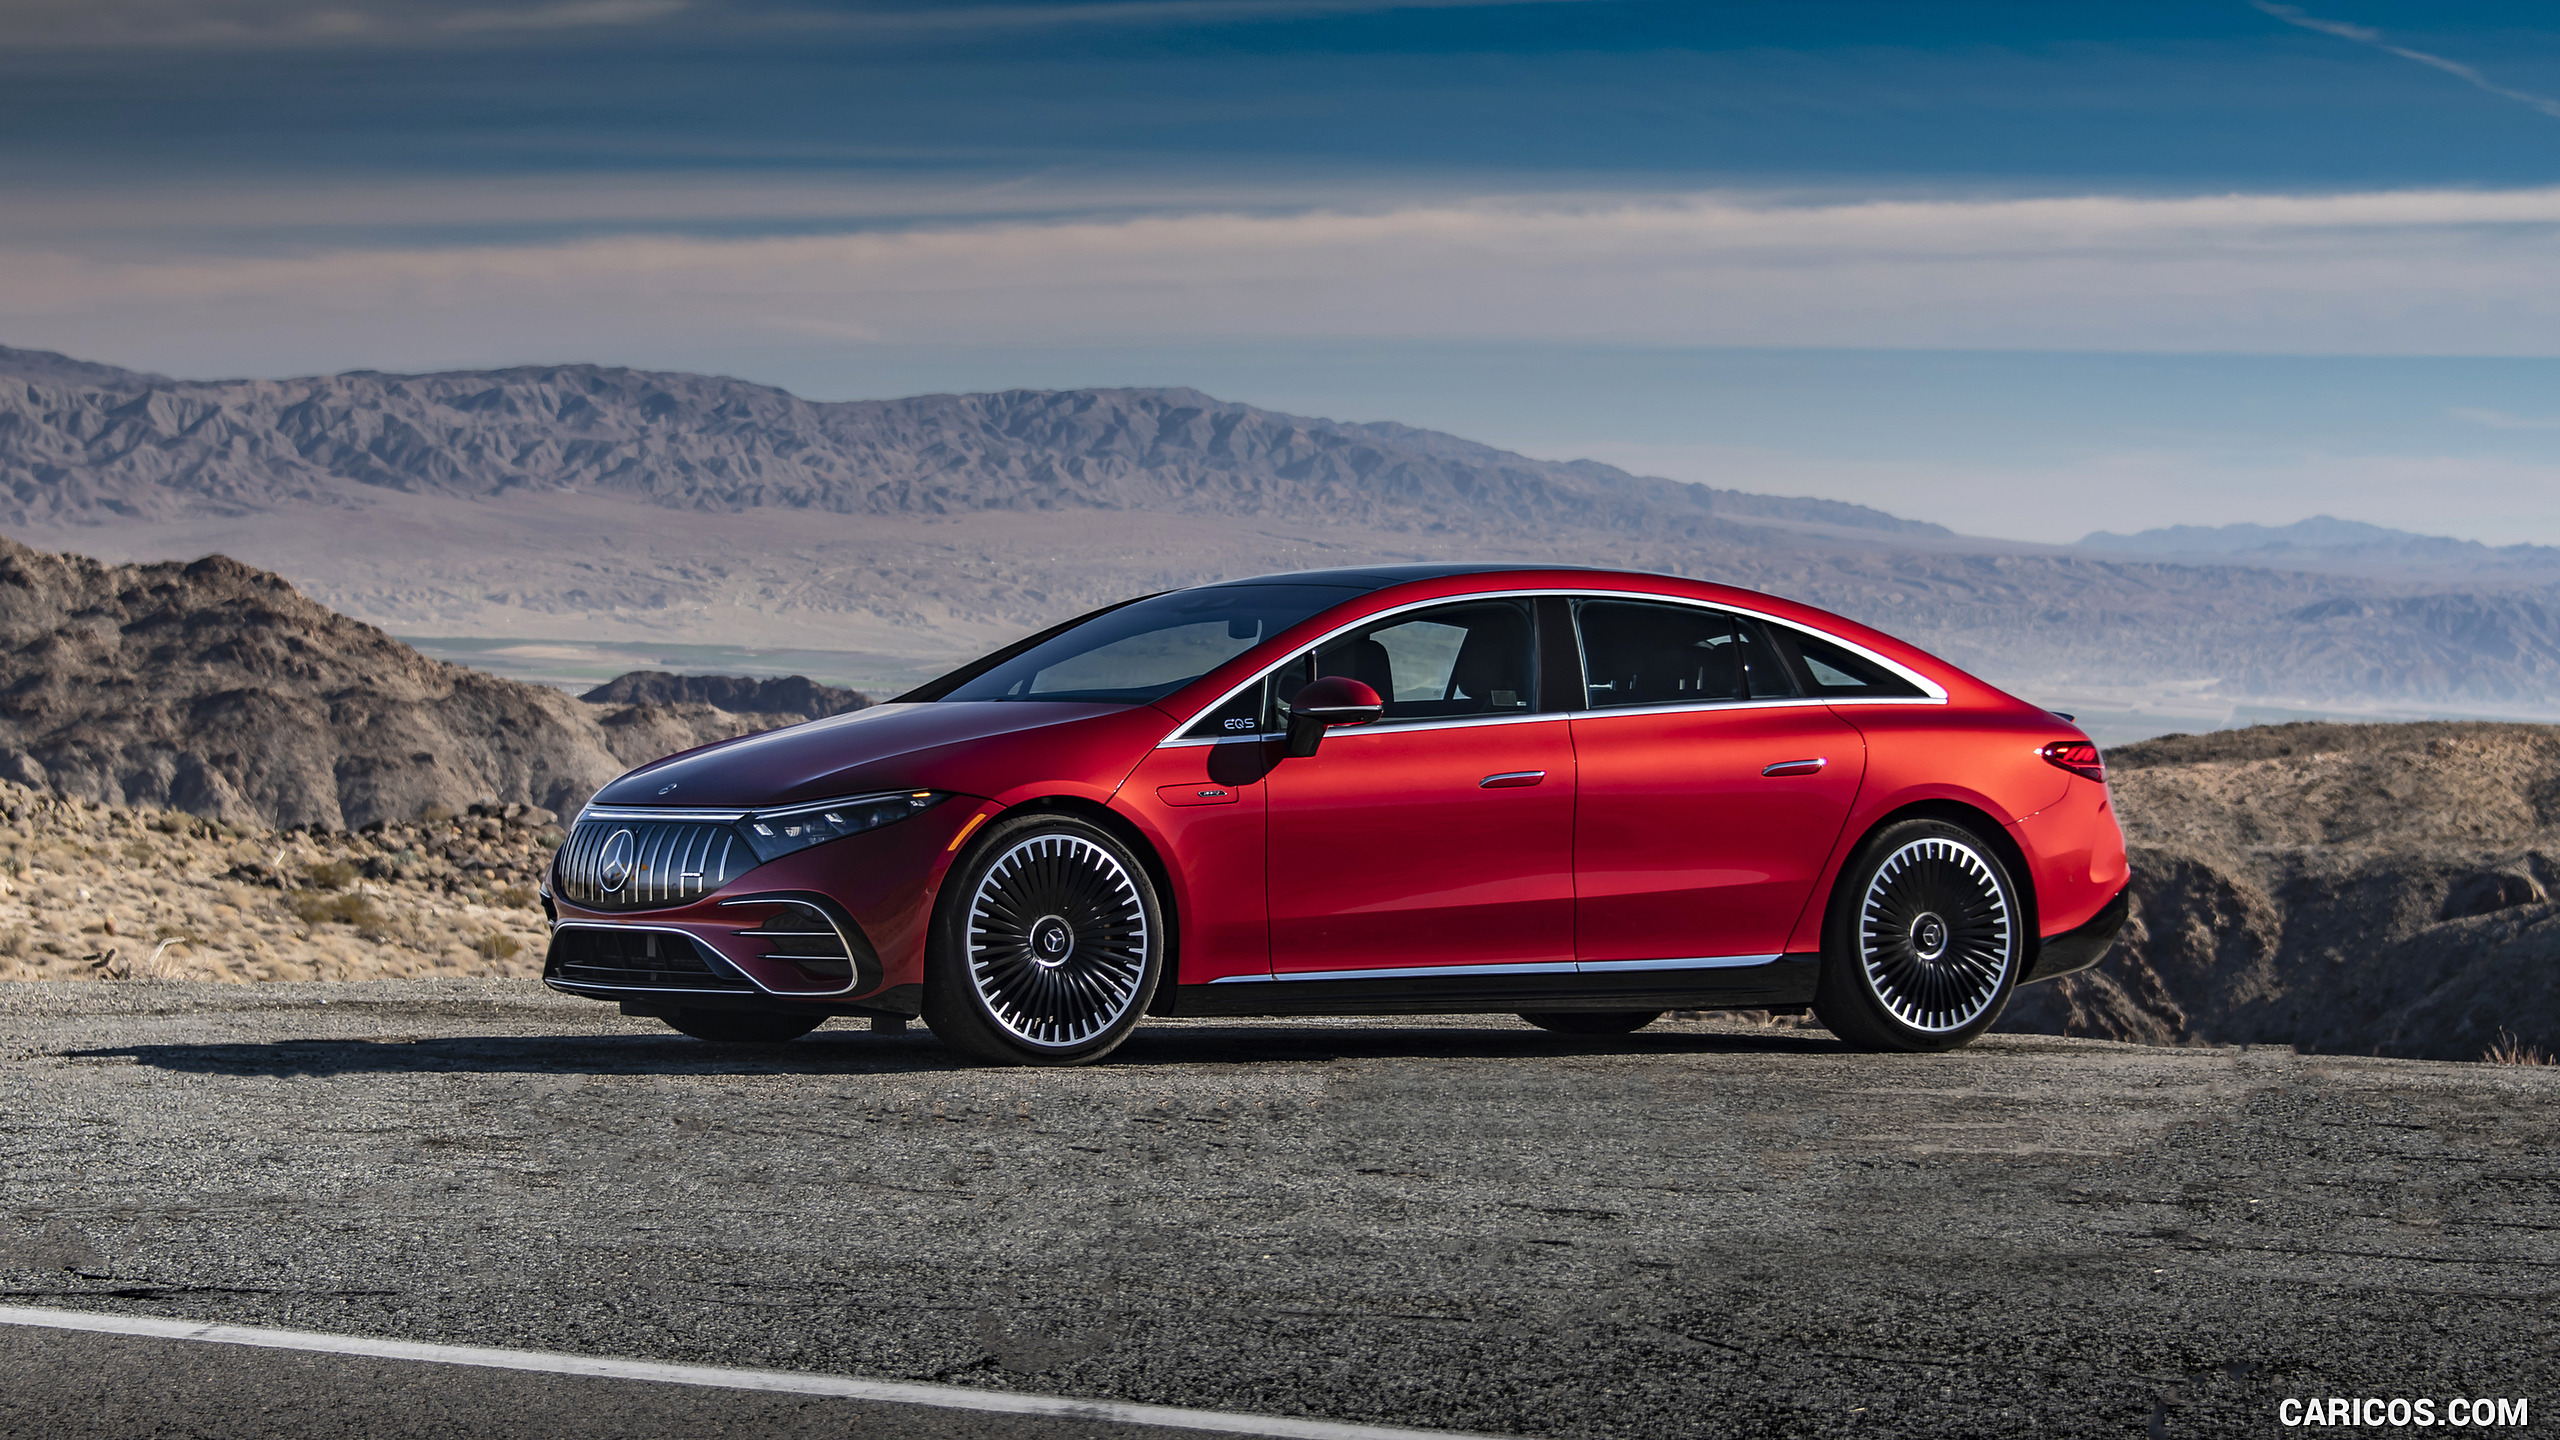 2022 Mercedes-AMG EQS 53 4MATIC+ (Color: Hyazinth Red Metallic) - Front Three-Quarter, #51 of 76